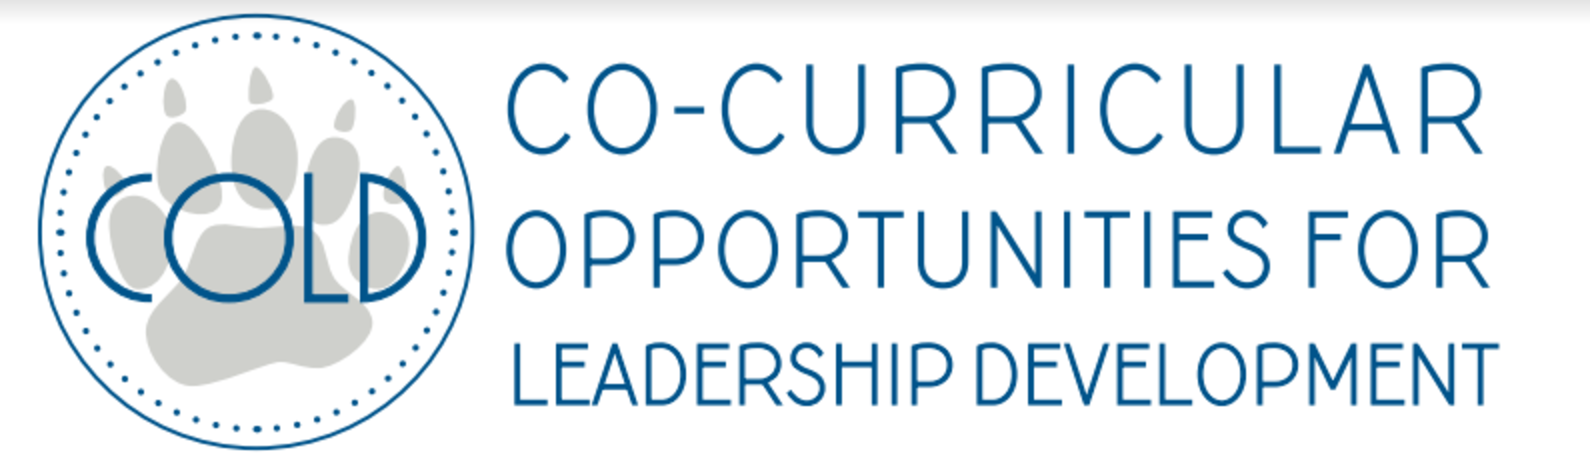 COLD co-curricular opportunities for leadership development